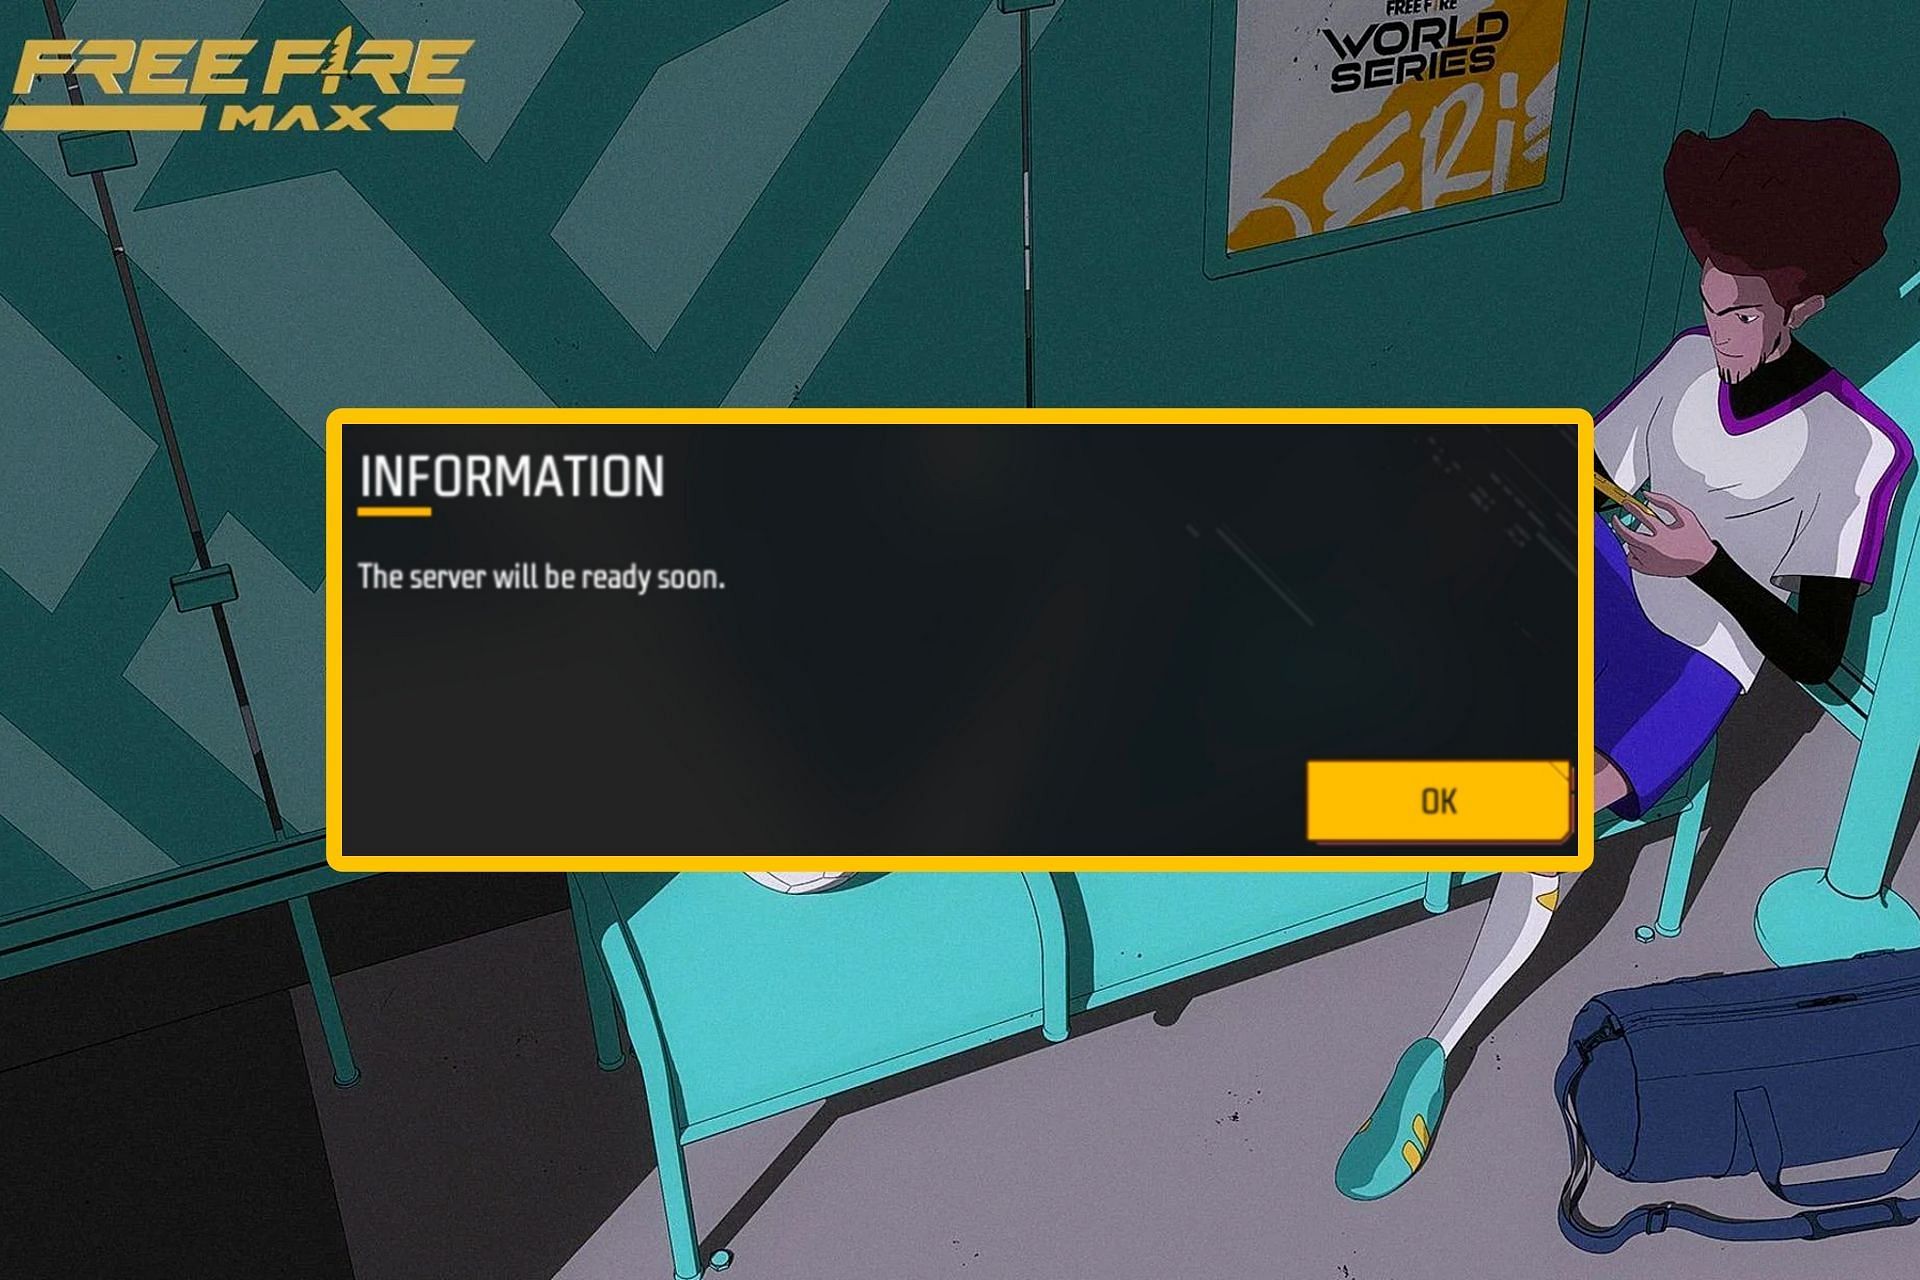 A new error is popping up after the latest Free Fire update (Image via Sportskeeda)